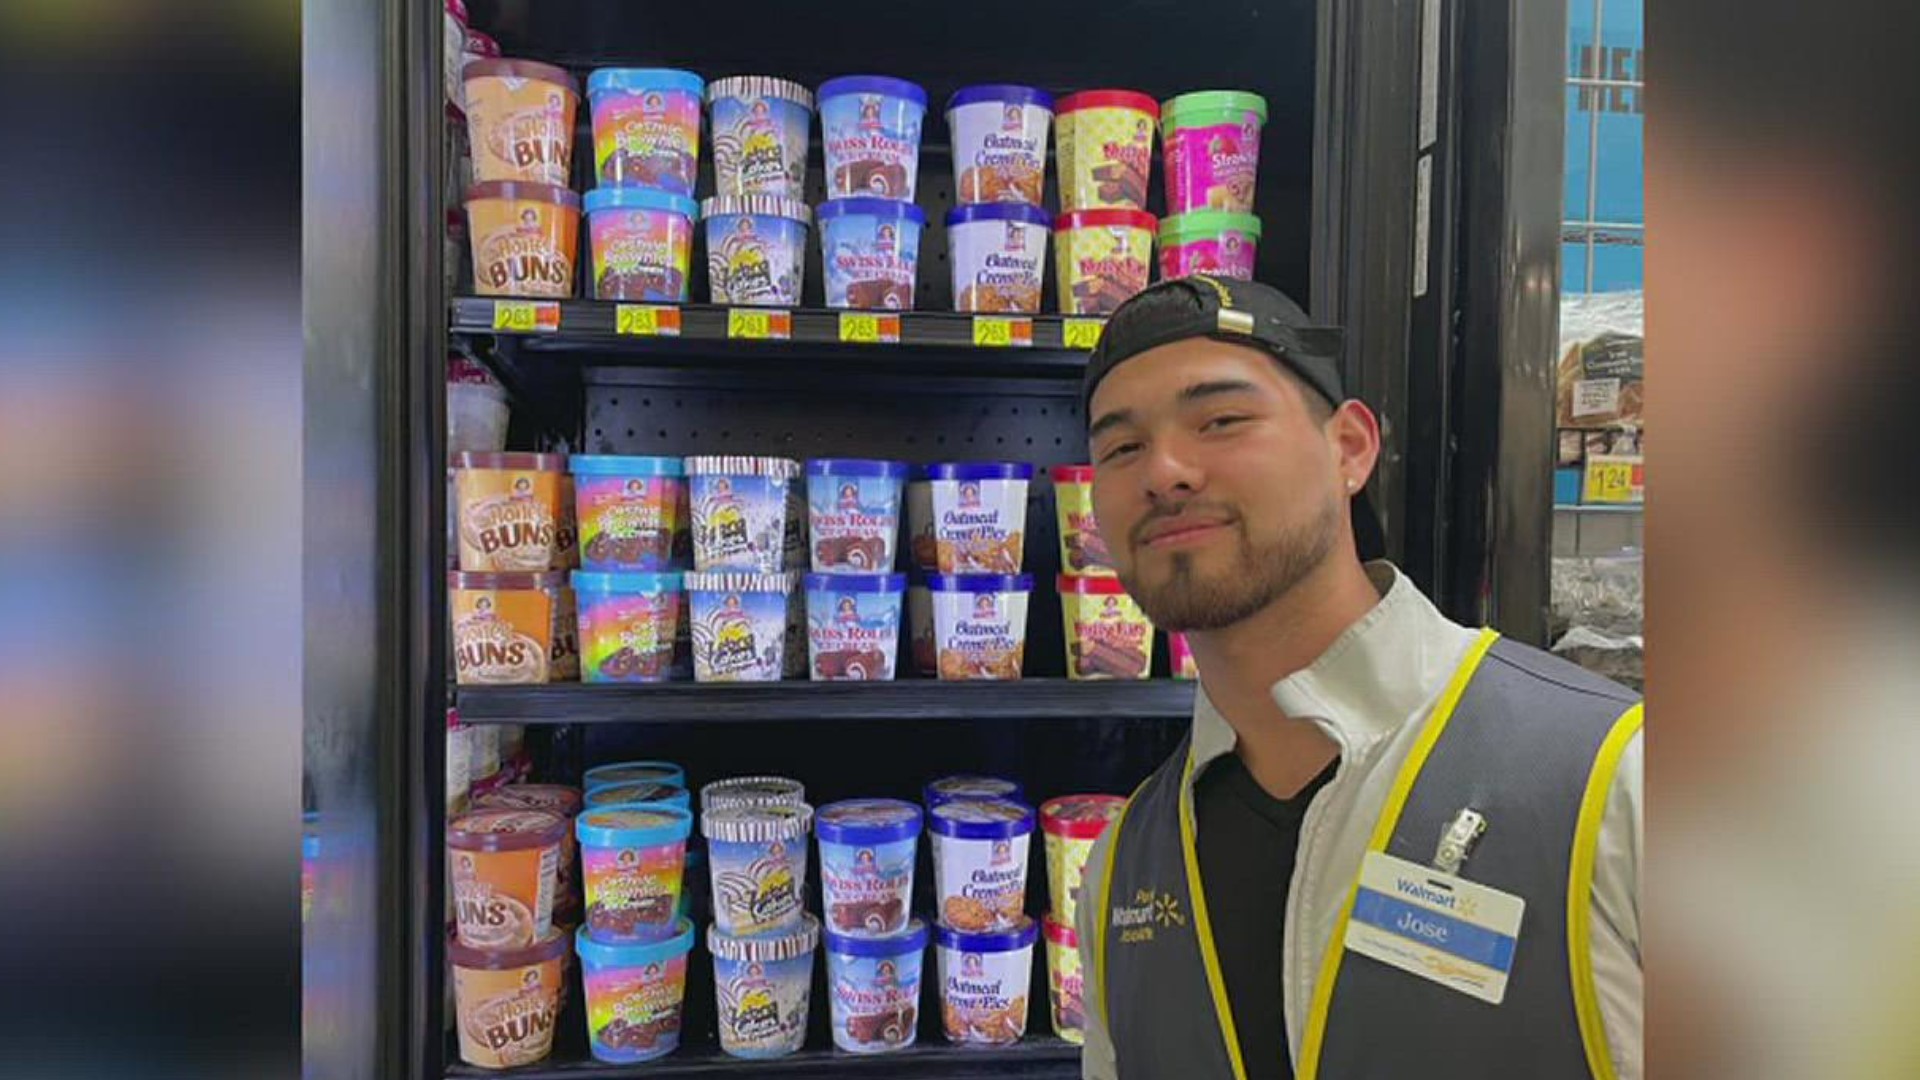 The Walmart on Saratoga posted a photo of Jose in front of their ice cream display and warmed hearts everywhere.